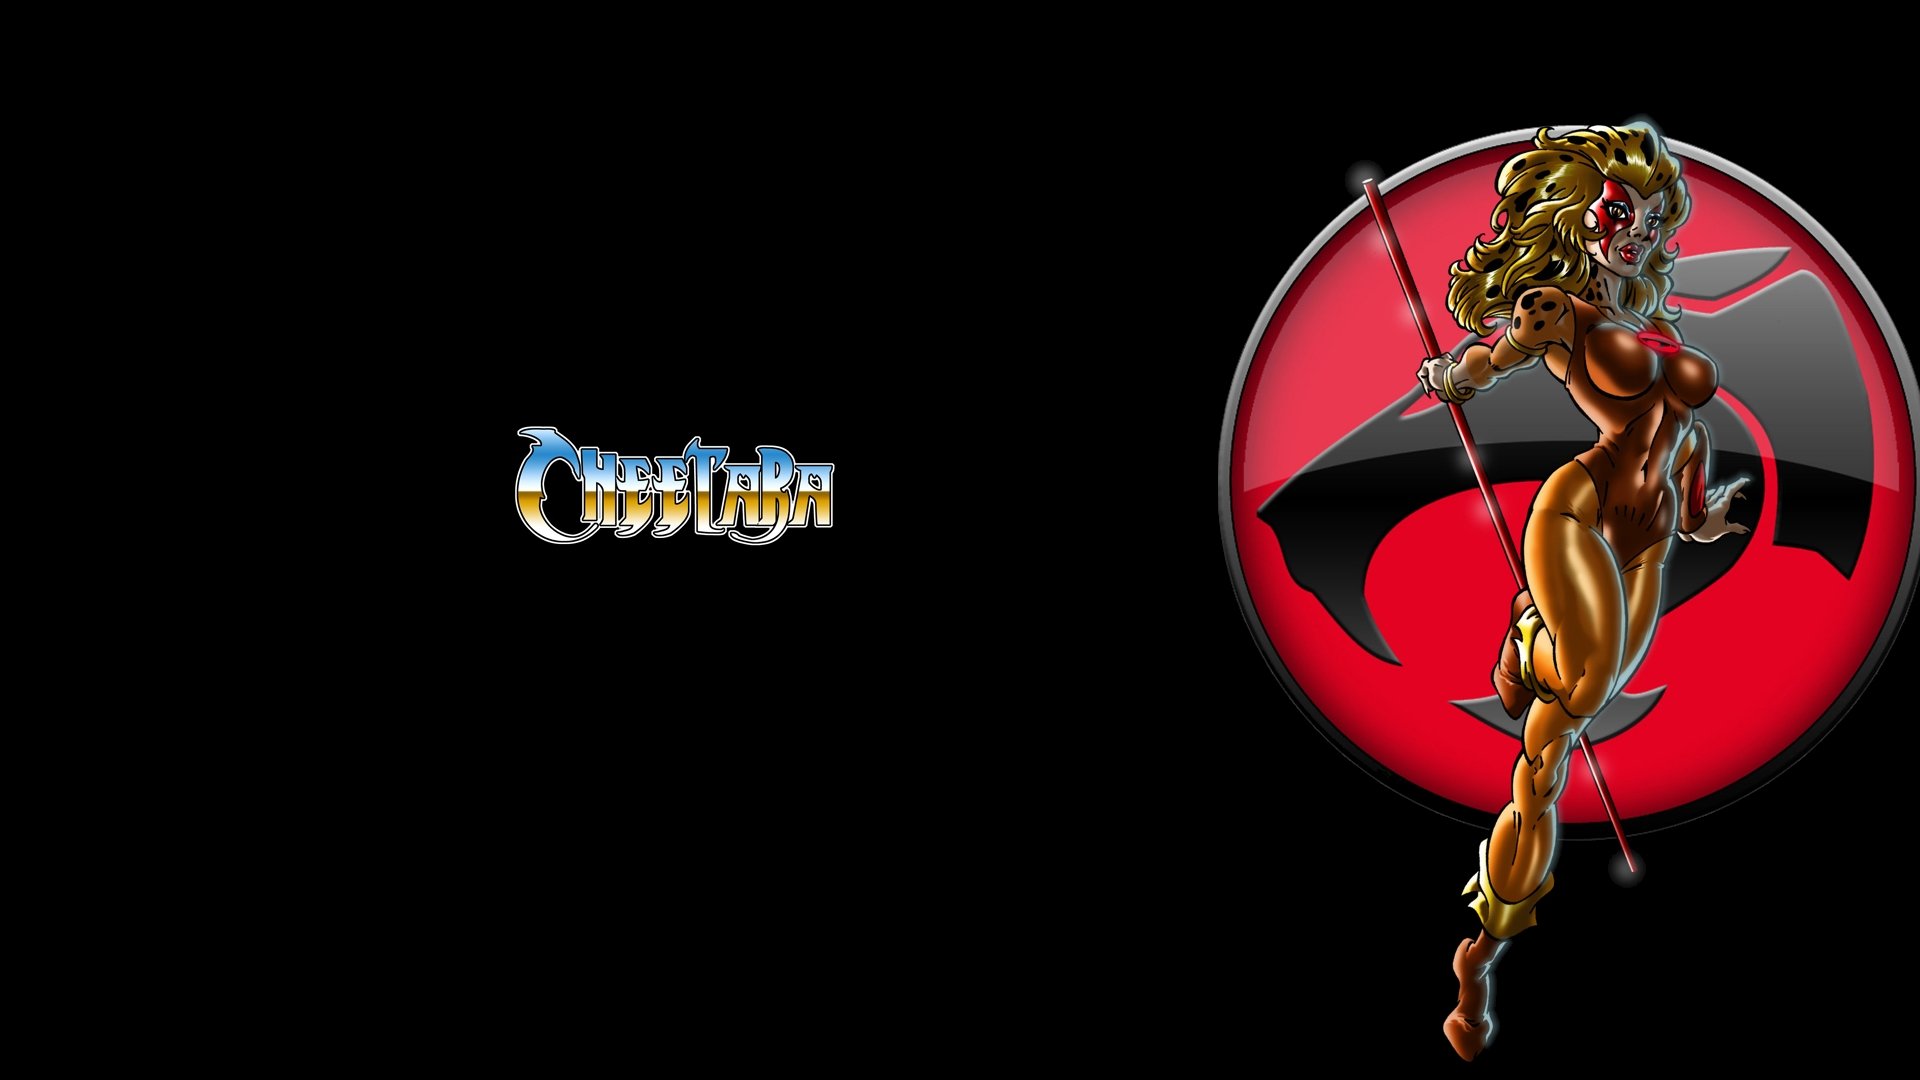 Download full hd 1080p Thundercats PC background ID:186456 for free